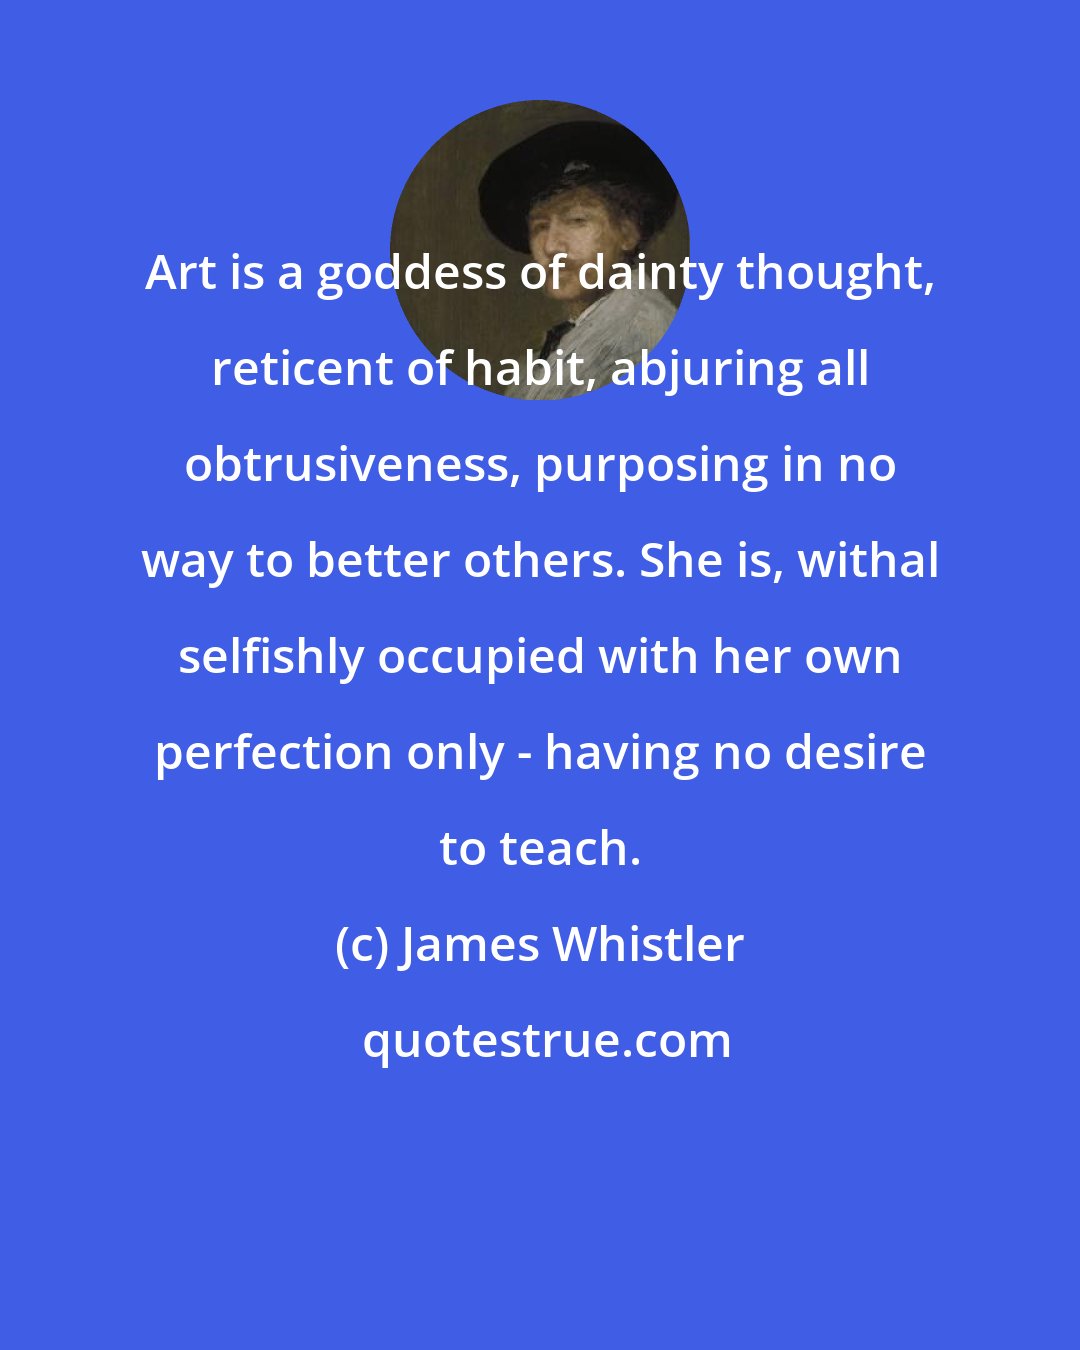 James Whistler: Art is a goddess of dainty thought, reticent of habit, abjuring all obtrusiveness, purposing in no way to better others. She is, withal selfishly occupied with her own perfection only - having no desire to teach.